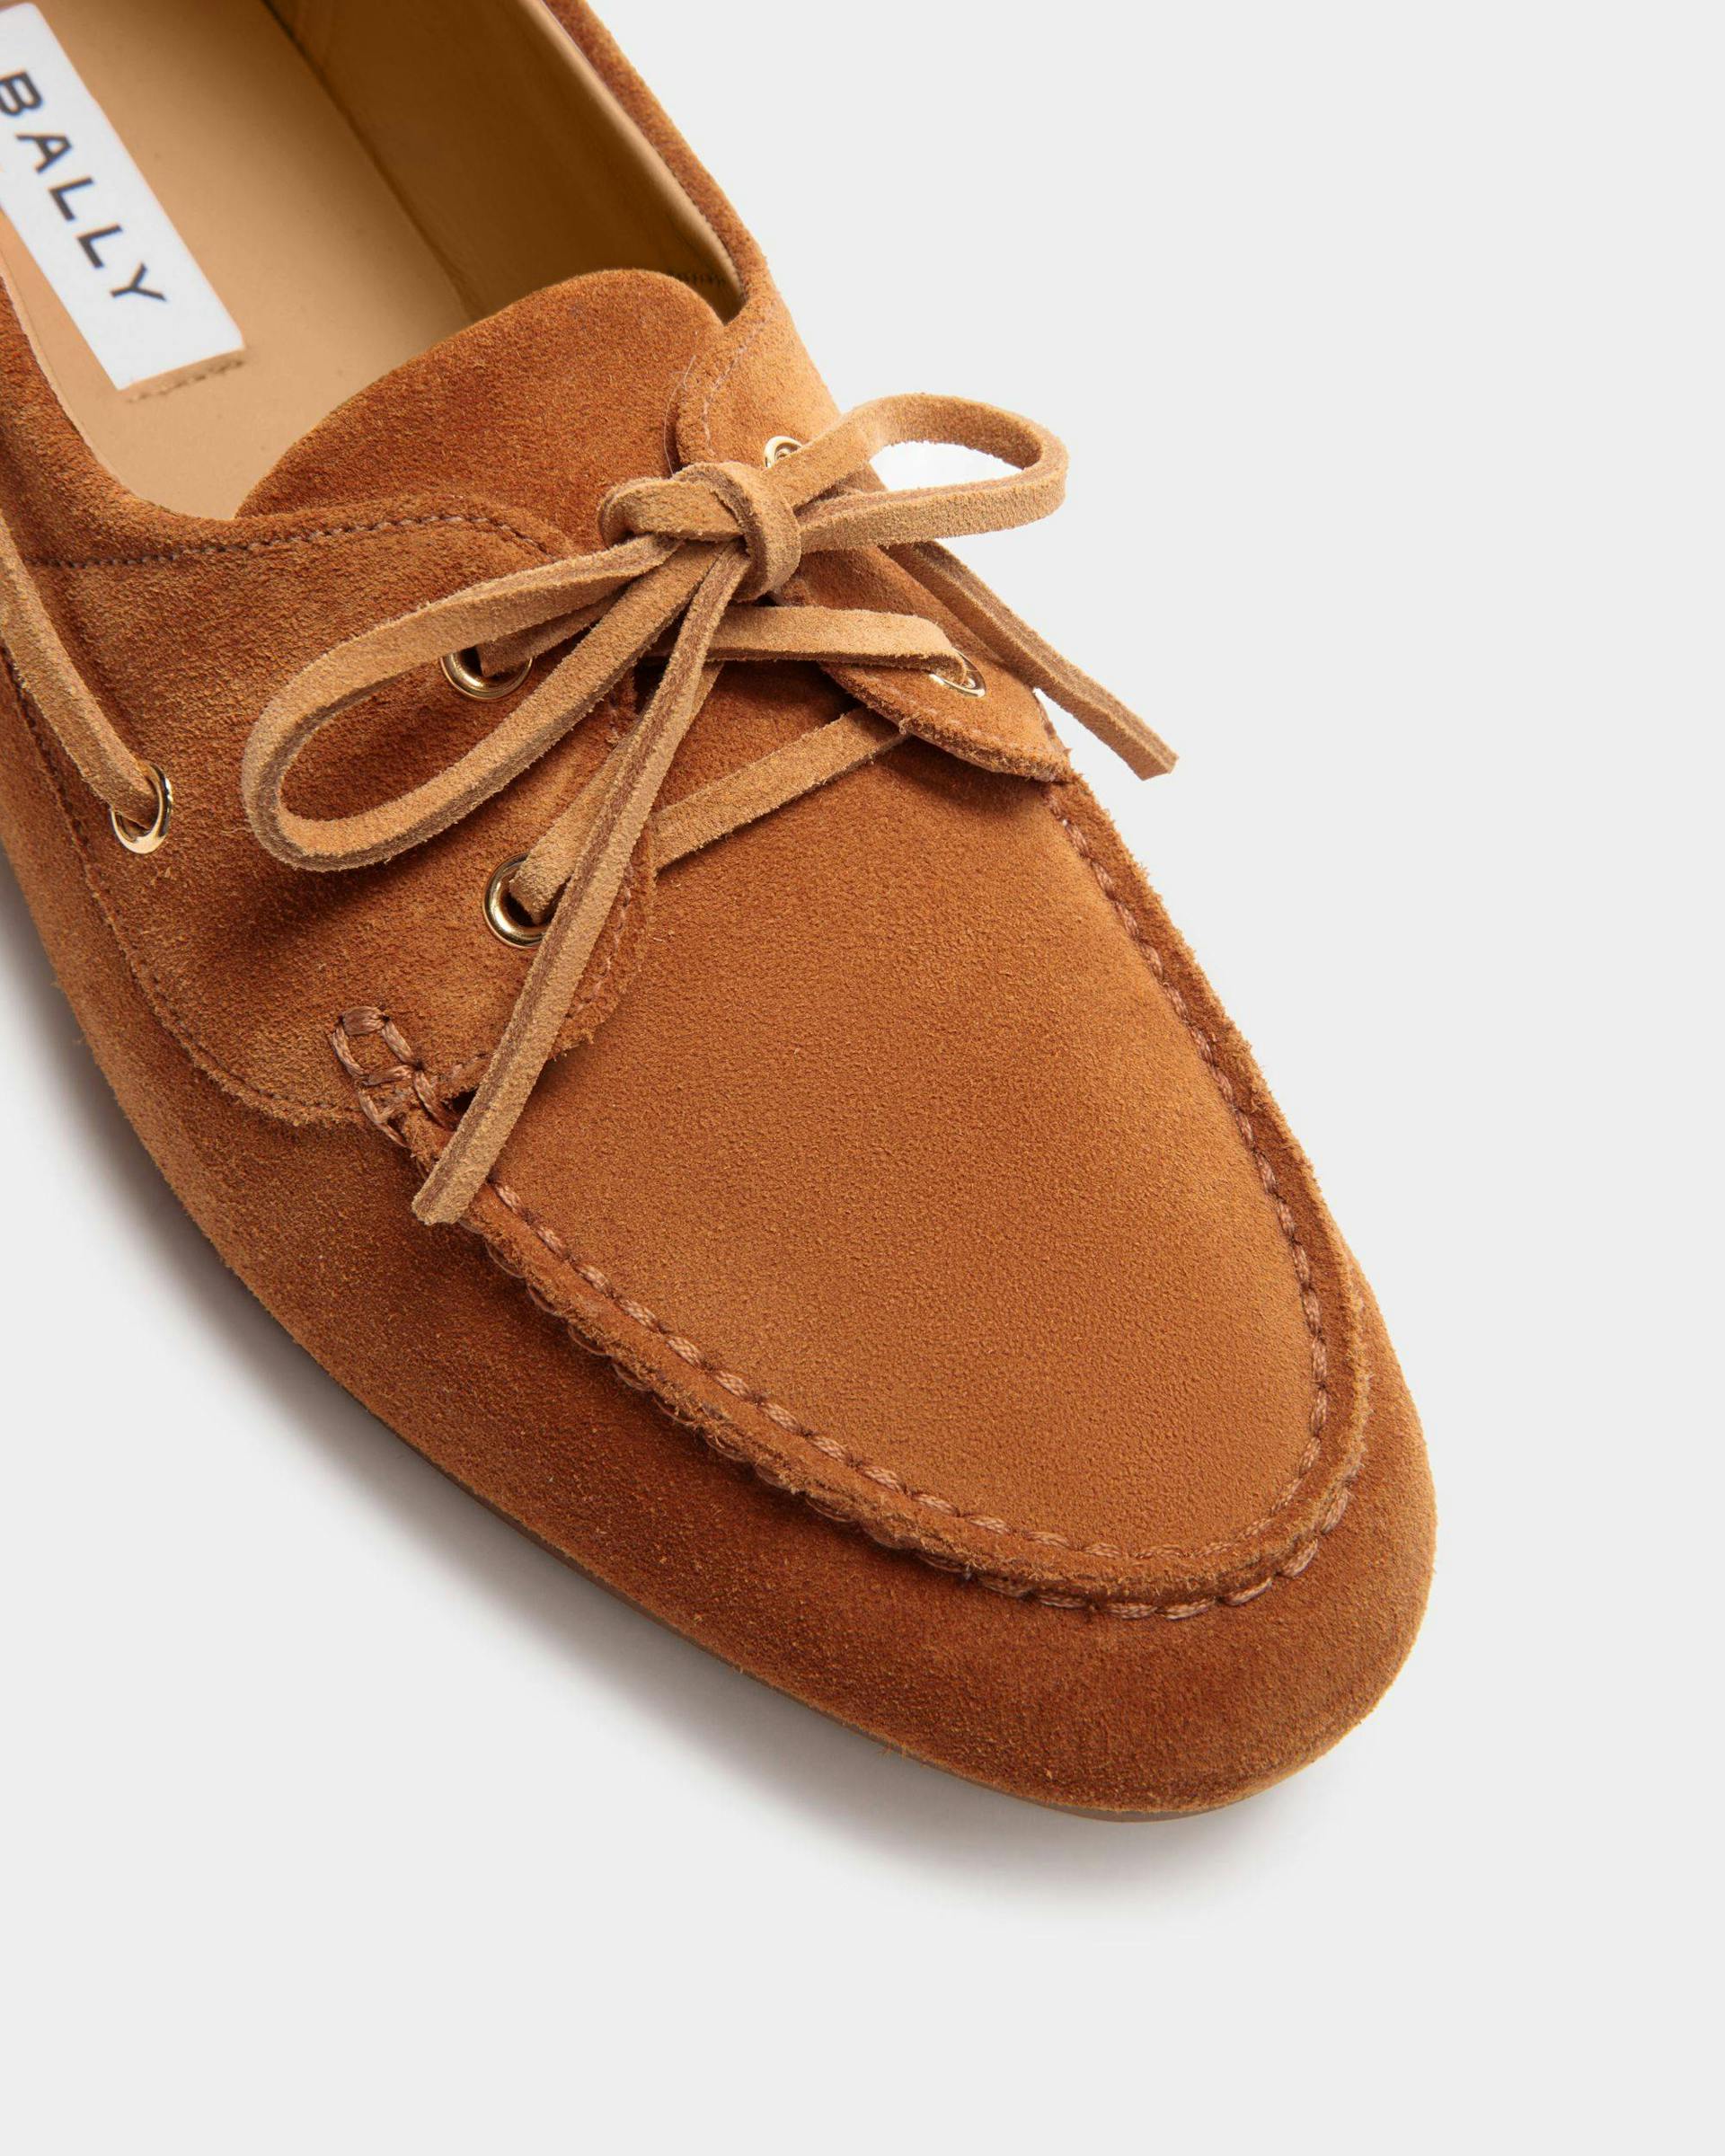 Women's Plume Moccasin in Brown Suede | Bally | Still Life Detail